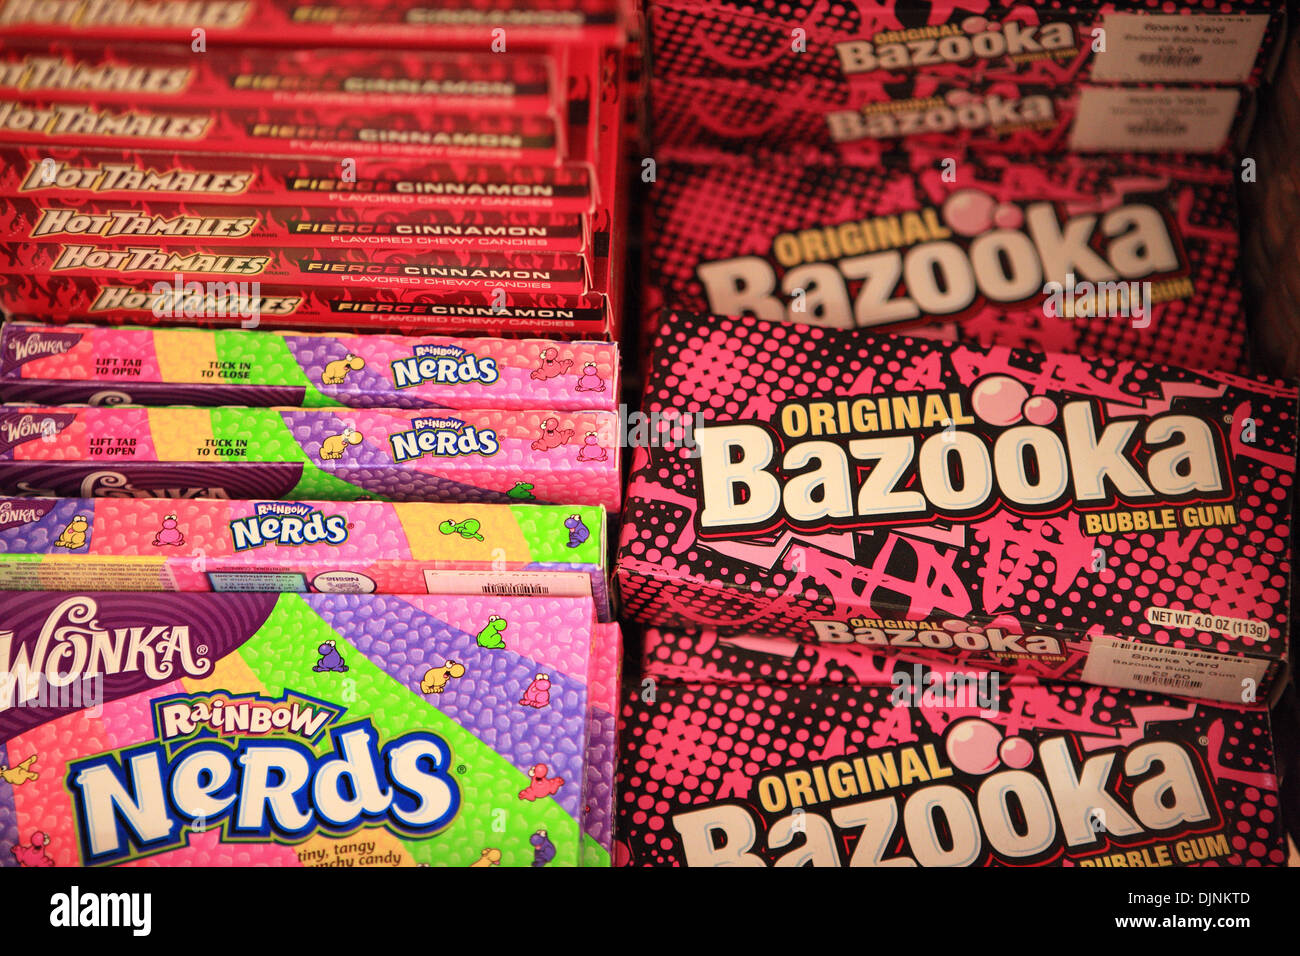 Original Bazooka bubble gum and Wonka Rainbow Nerds and Hot Tamales on sale in shop in the UK Stock Photo